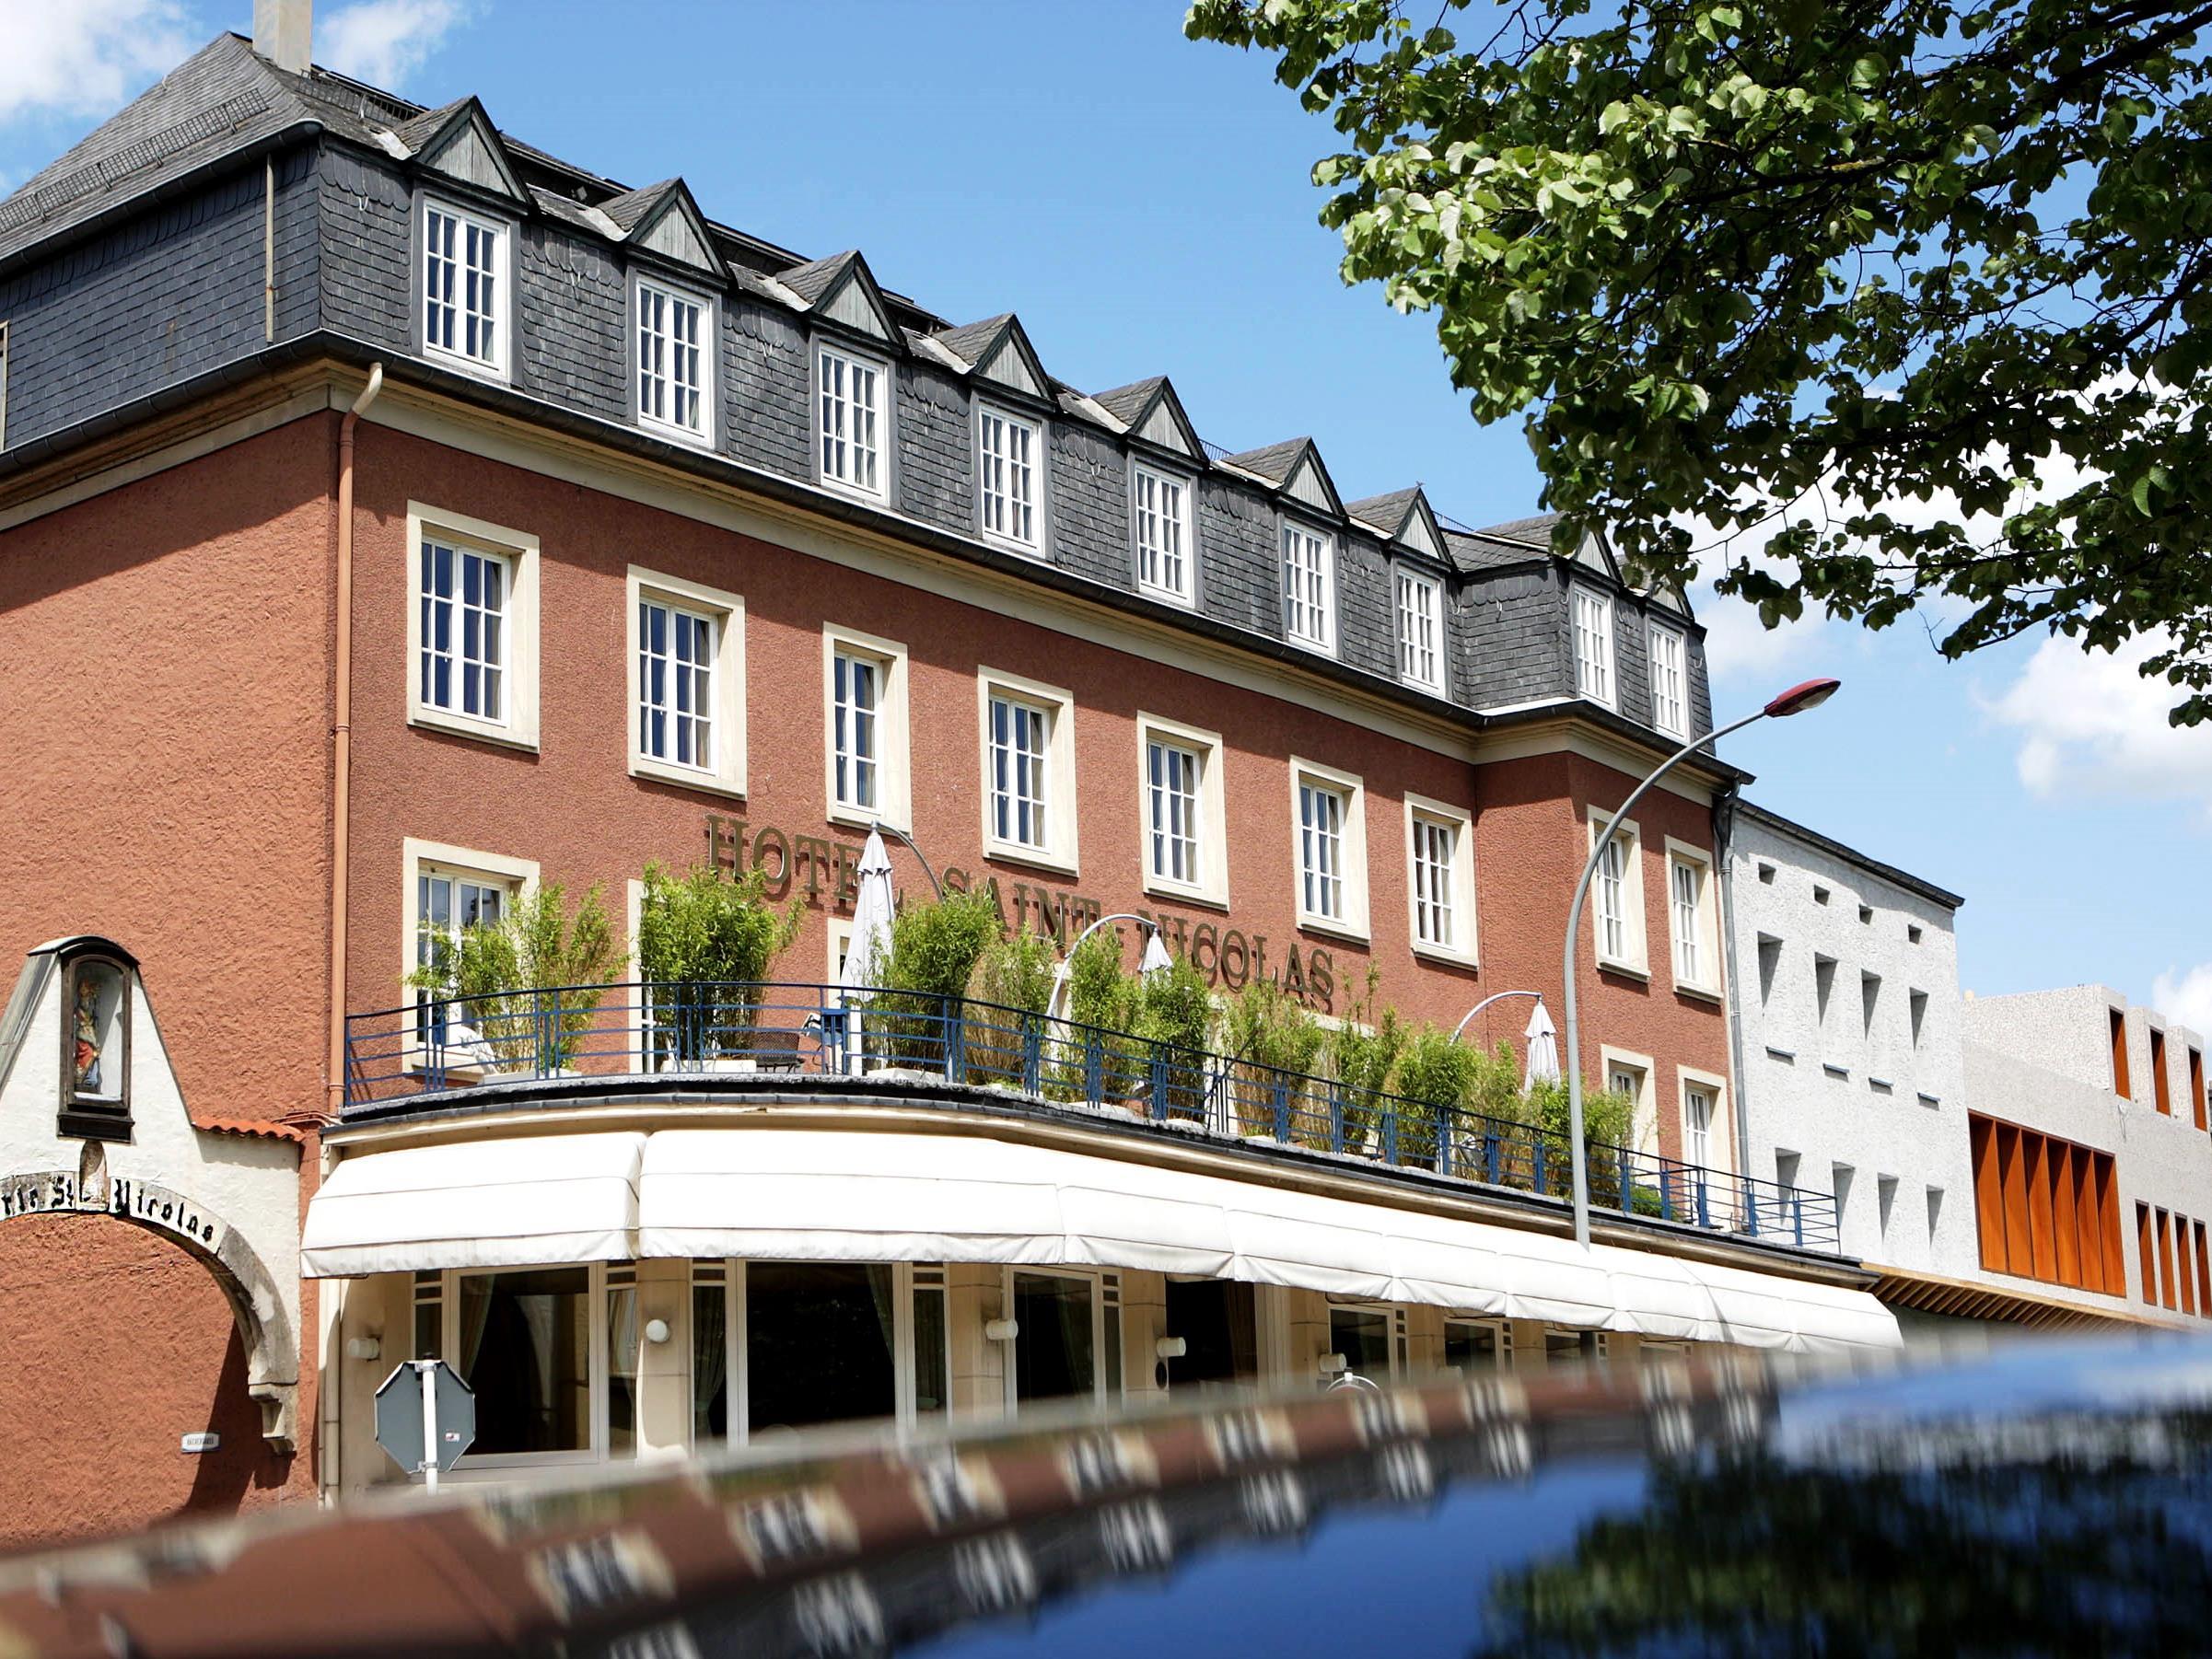 Hotel Saint-Nicolas & SPA Luxembourg FAQ 2016, What facilities are there in Hotel Saint-Nicolas & SPA Luxembourg 2016, What Languages Spoken are Supported in Hotel Saint-Nicolas & SPA Luxembourg 2016, Which payment cards are accepted in Hotel Saint-Nicolas & SPA Luxembourg , Luxembourg Hotel Saint-Nicolas & SPA room facilities and services Q&A 2016, Luxembourg Hotel Saint-Nicolas & SPA online booking services 2016, Luxembourg Hotel Saint-Nicolas & SPA address 2016, Luxembourg Hotel Saint-Nicolas & SPA telephone number 2016,Luxembourg Hotel Saint-Nicolas & SPA map 2016, Luxembourg Hotel Saint-Nicolas & SPA traffic guide 2016, how to go Luxembourg Hotel Saint-Nicolas & SPA, Luxembourg Hotel Saint-Nicolas & SPA booking online 2016, Luxembourg Hotel Saint-Nicolas & SPA room types 2016.